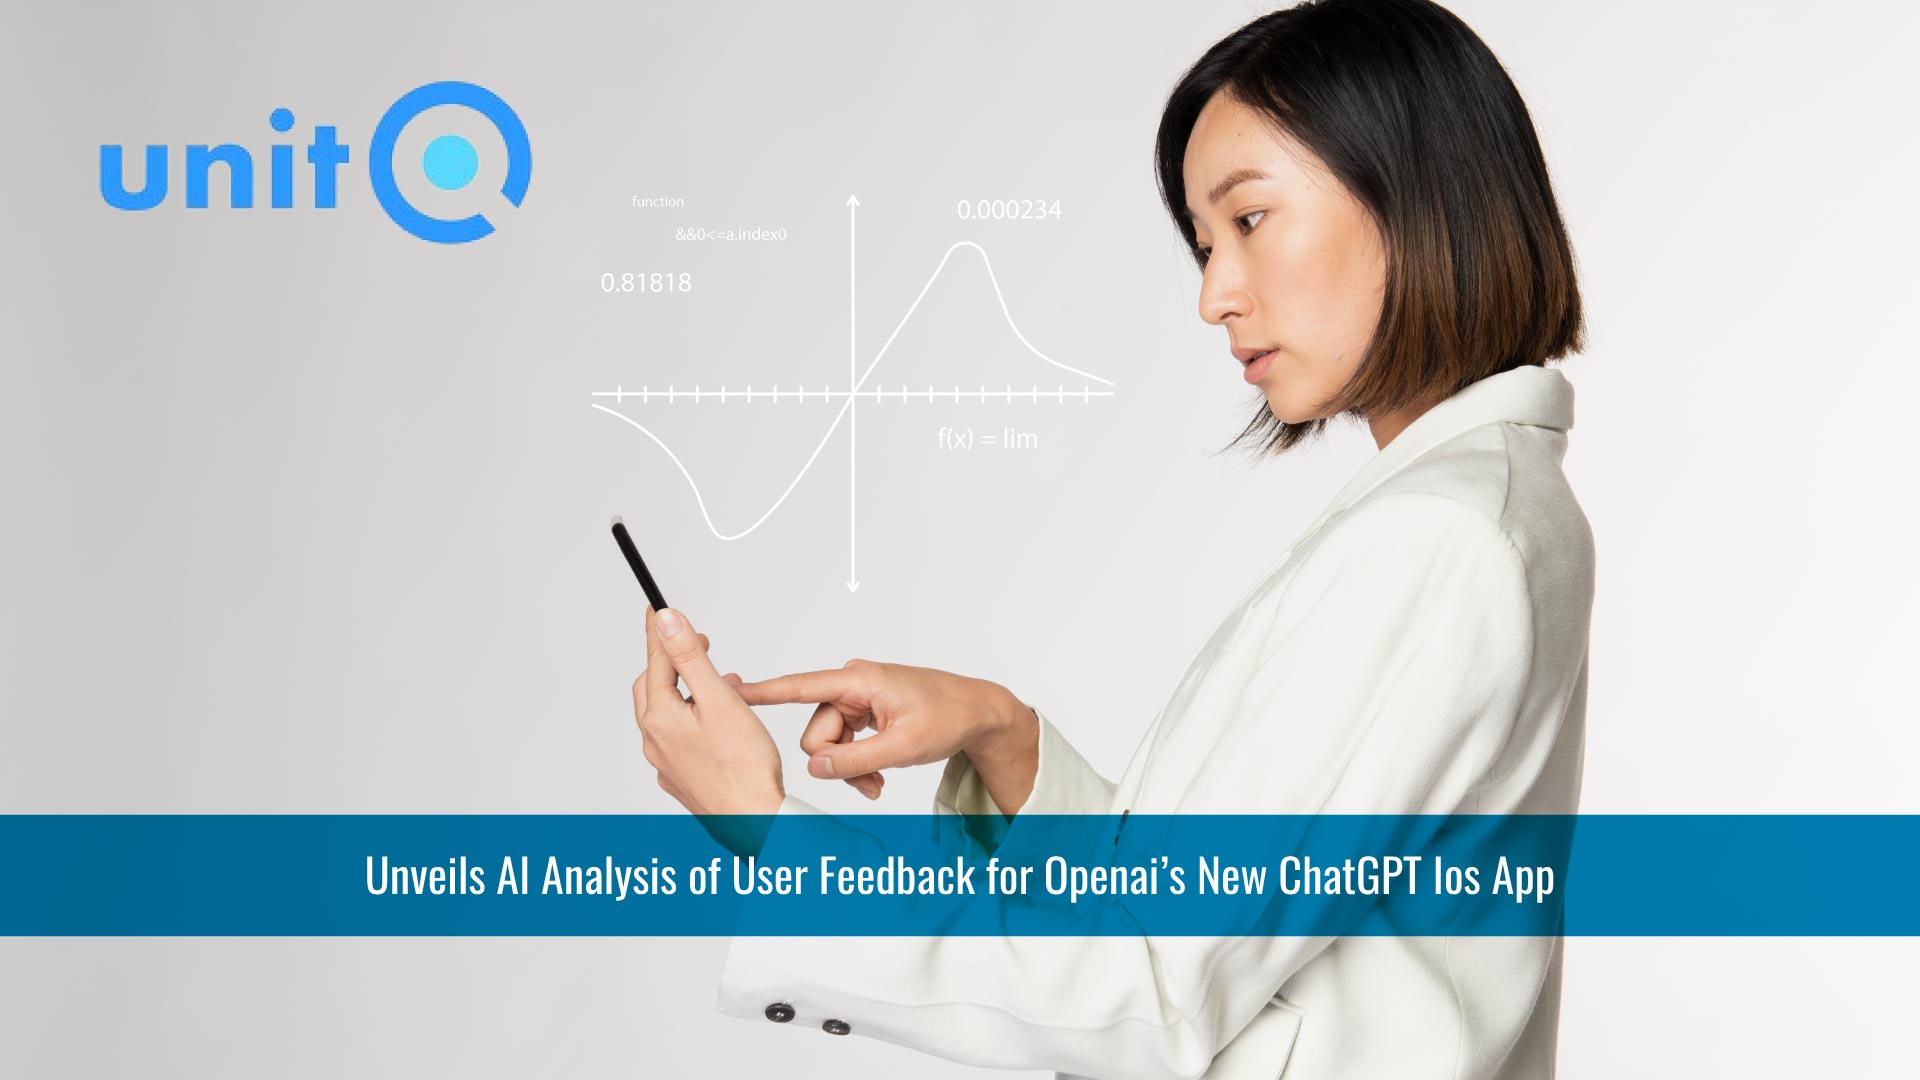 unitQ Unveils AI Analysis of User Feedback for OpenAI's New ChatGPT iOS App